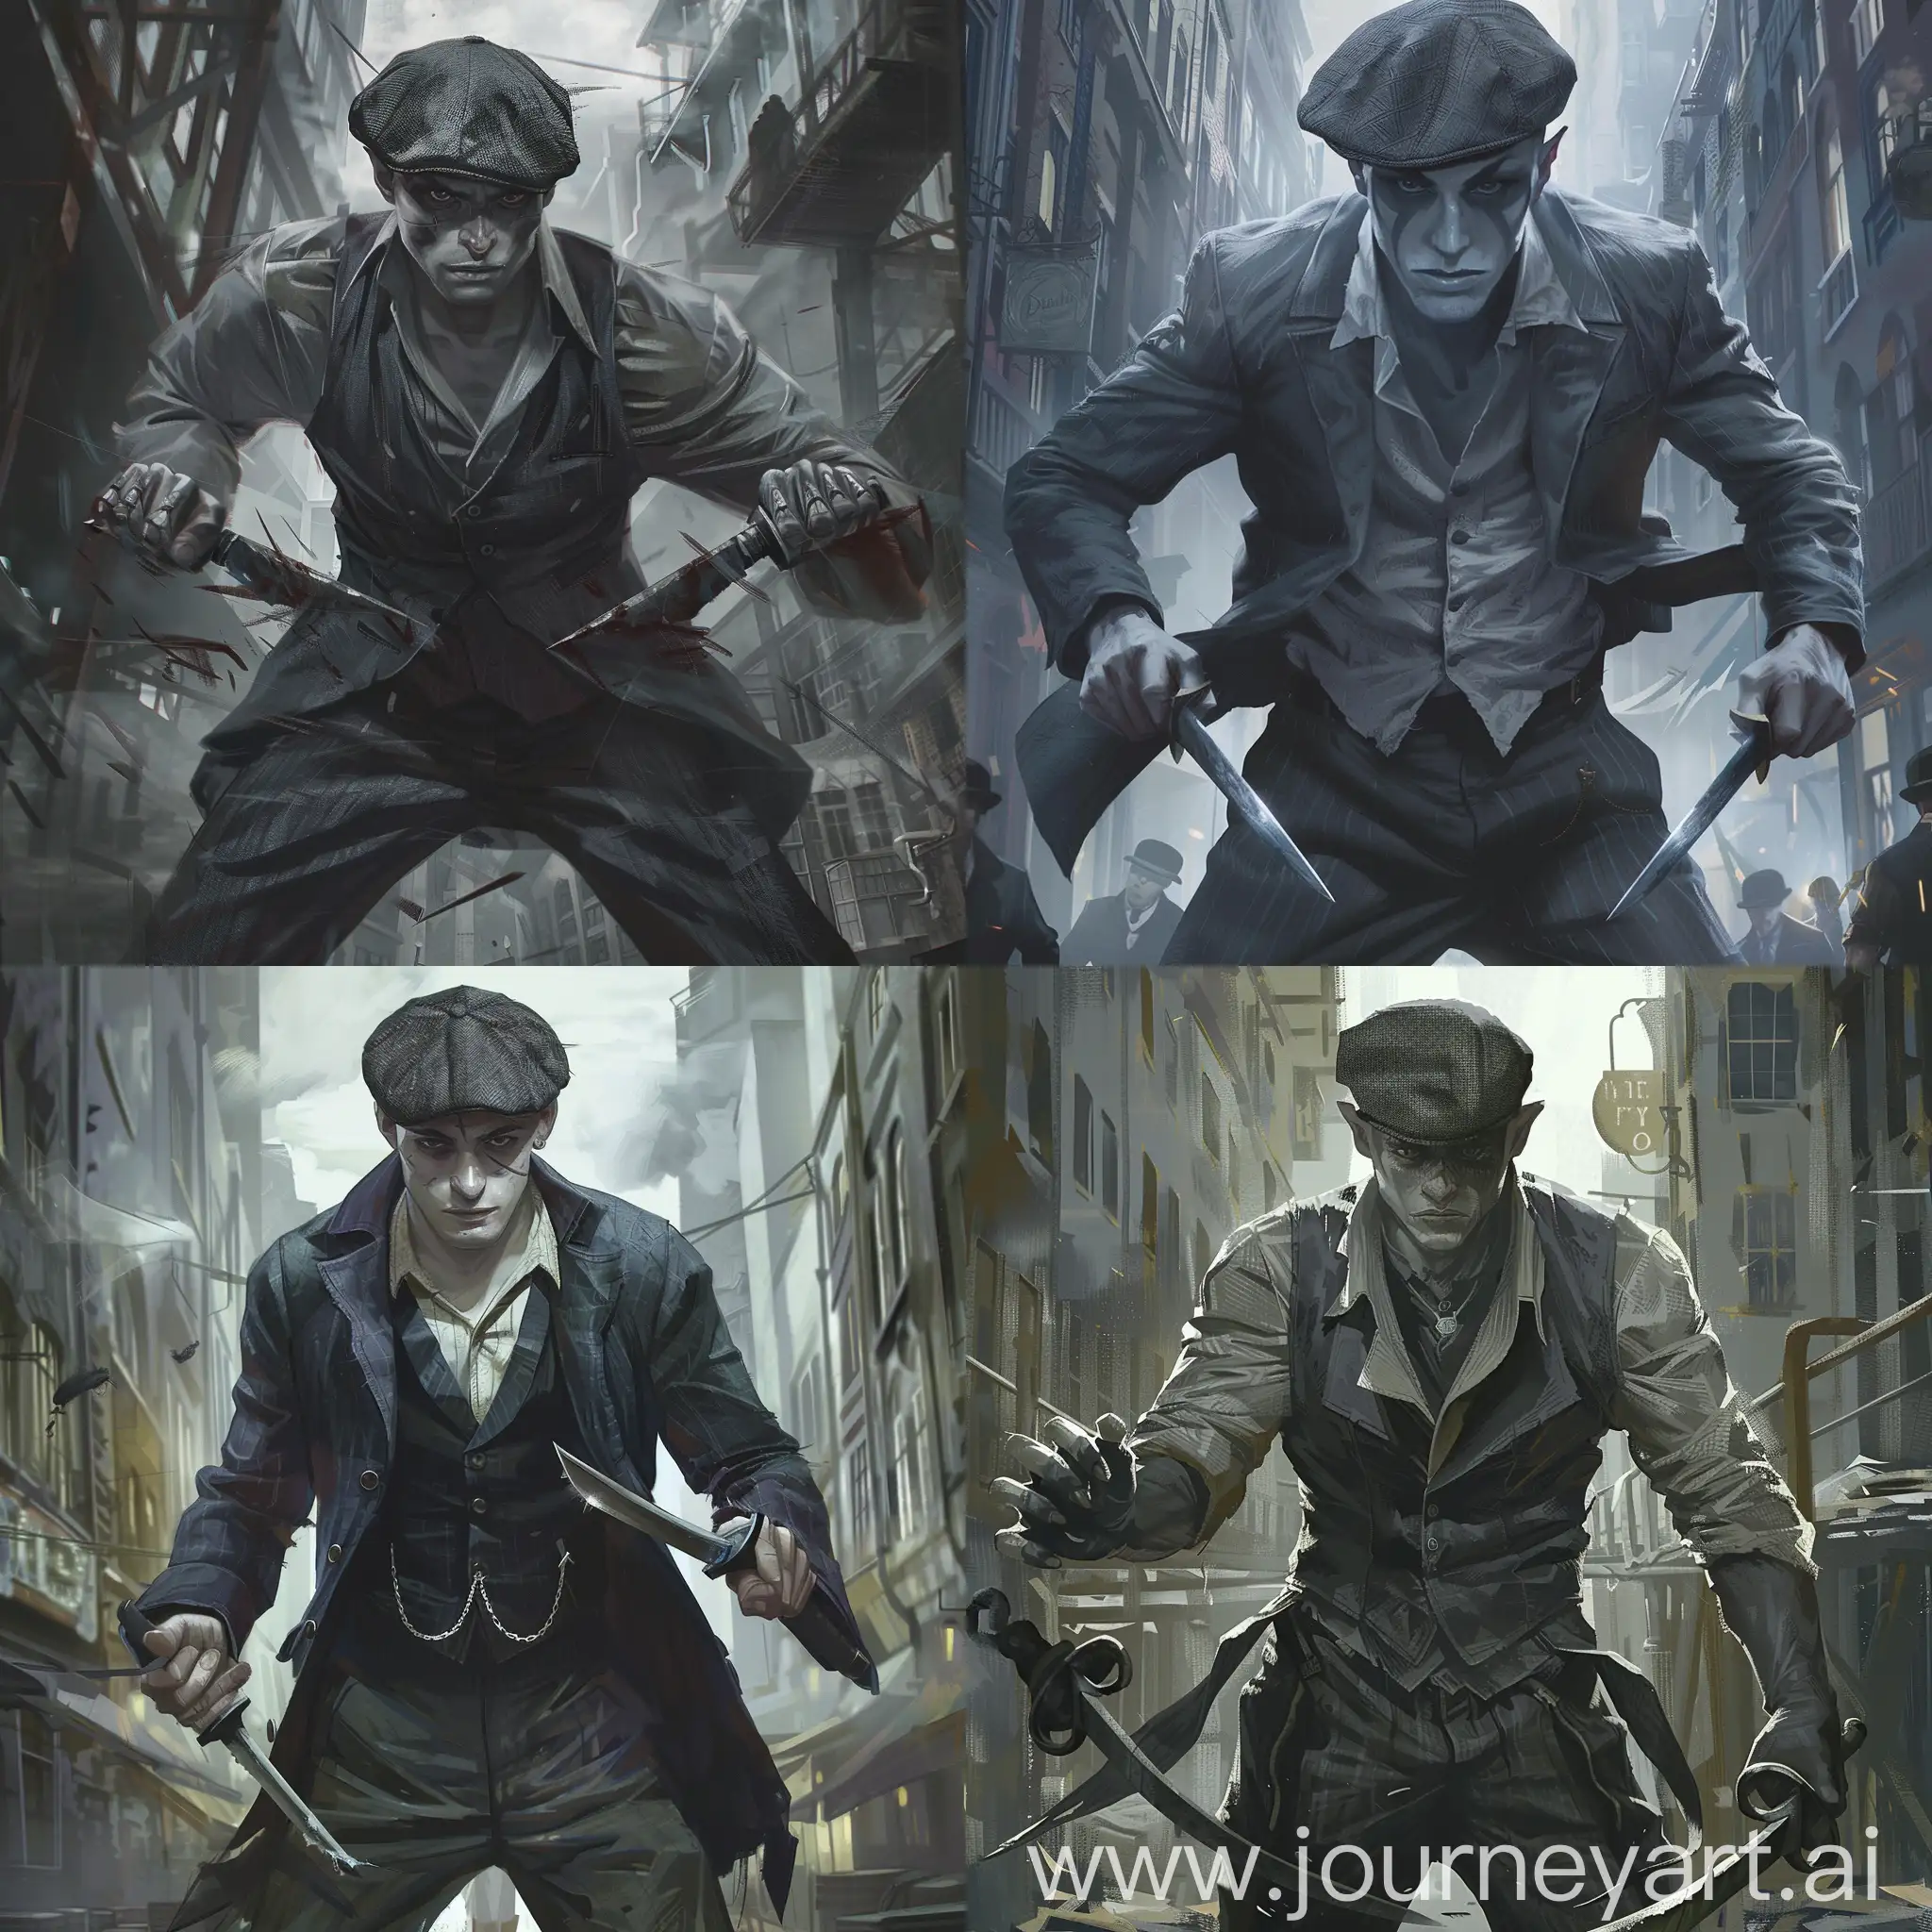 Draw a character from the Dungeons and Dragons universe according to the following description: He is a 20 years old male changeling dressed in clothing in the style of peaky blinders. He is holding a dagger in each hand. He is wearing a flat cap. His eyes are dark. His skin is light grey, almost white like ash. He is standing in the middle of an industrial city.